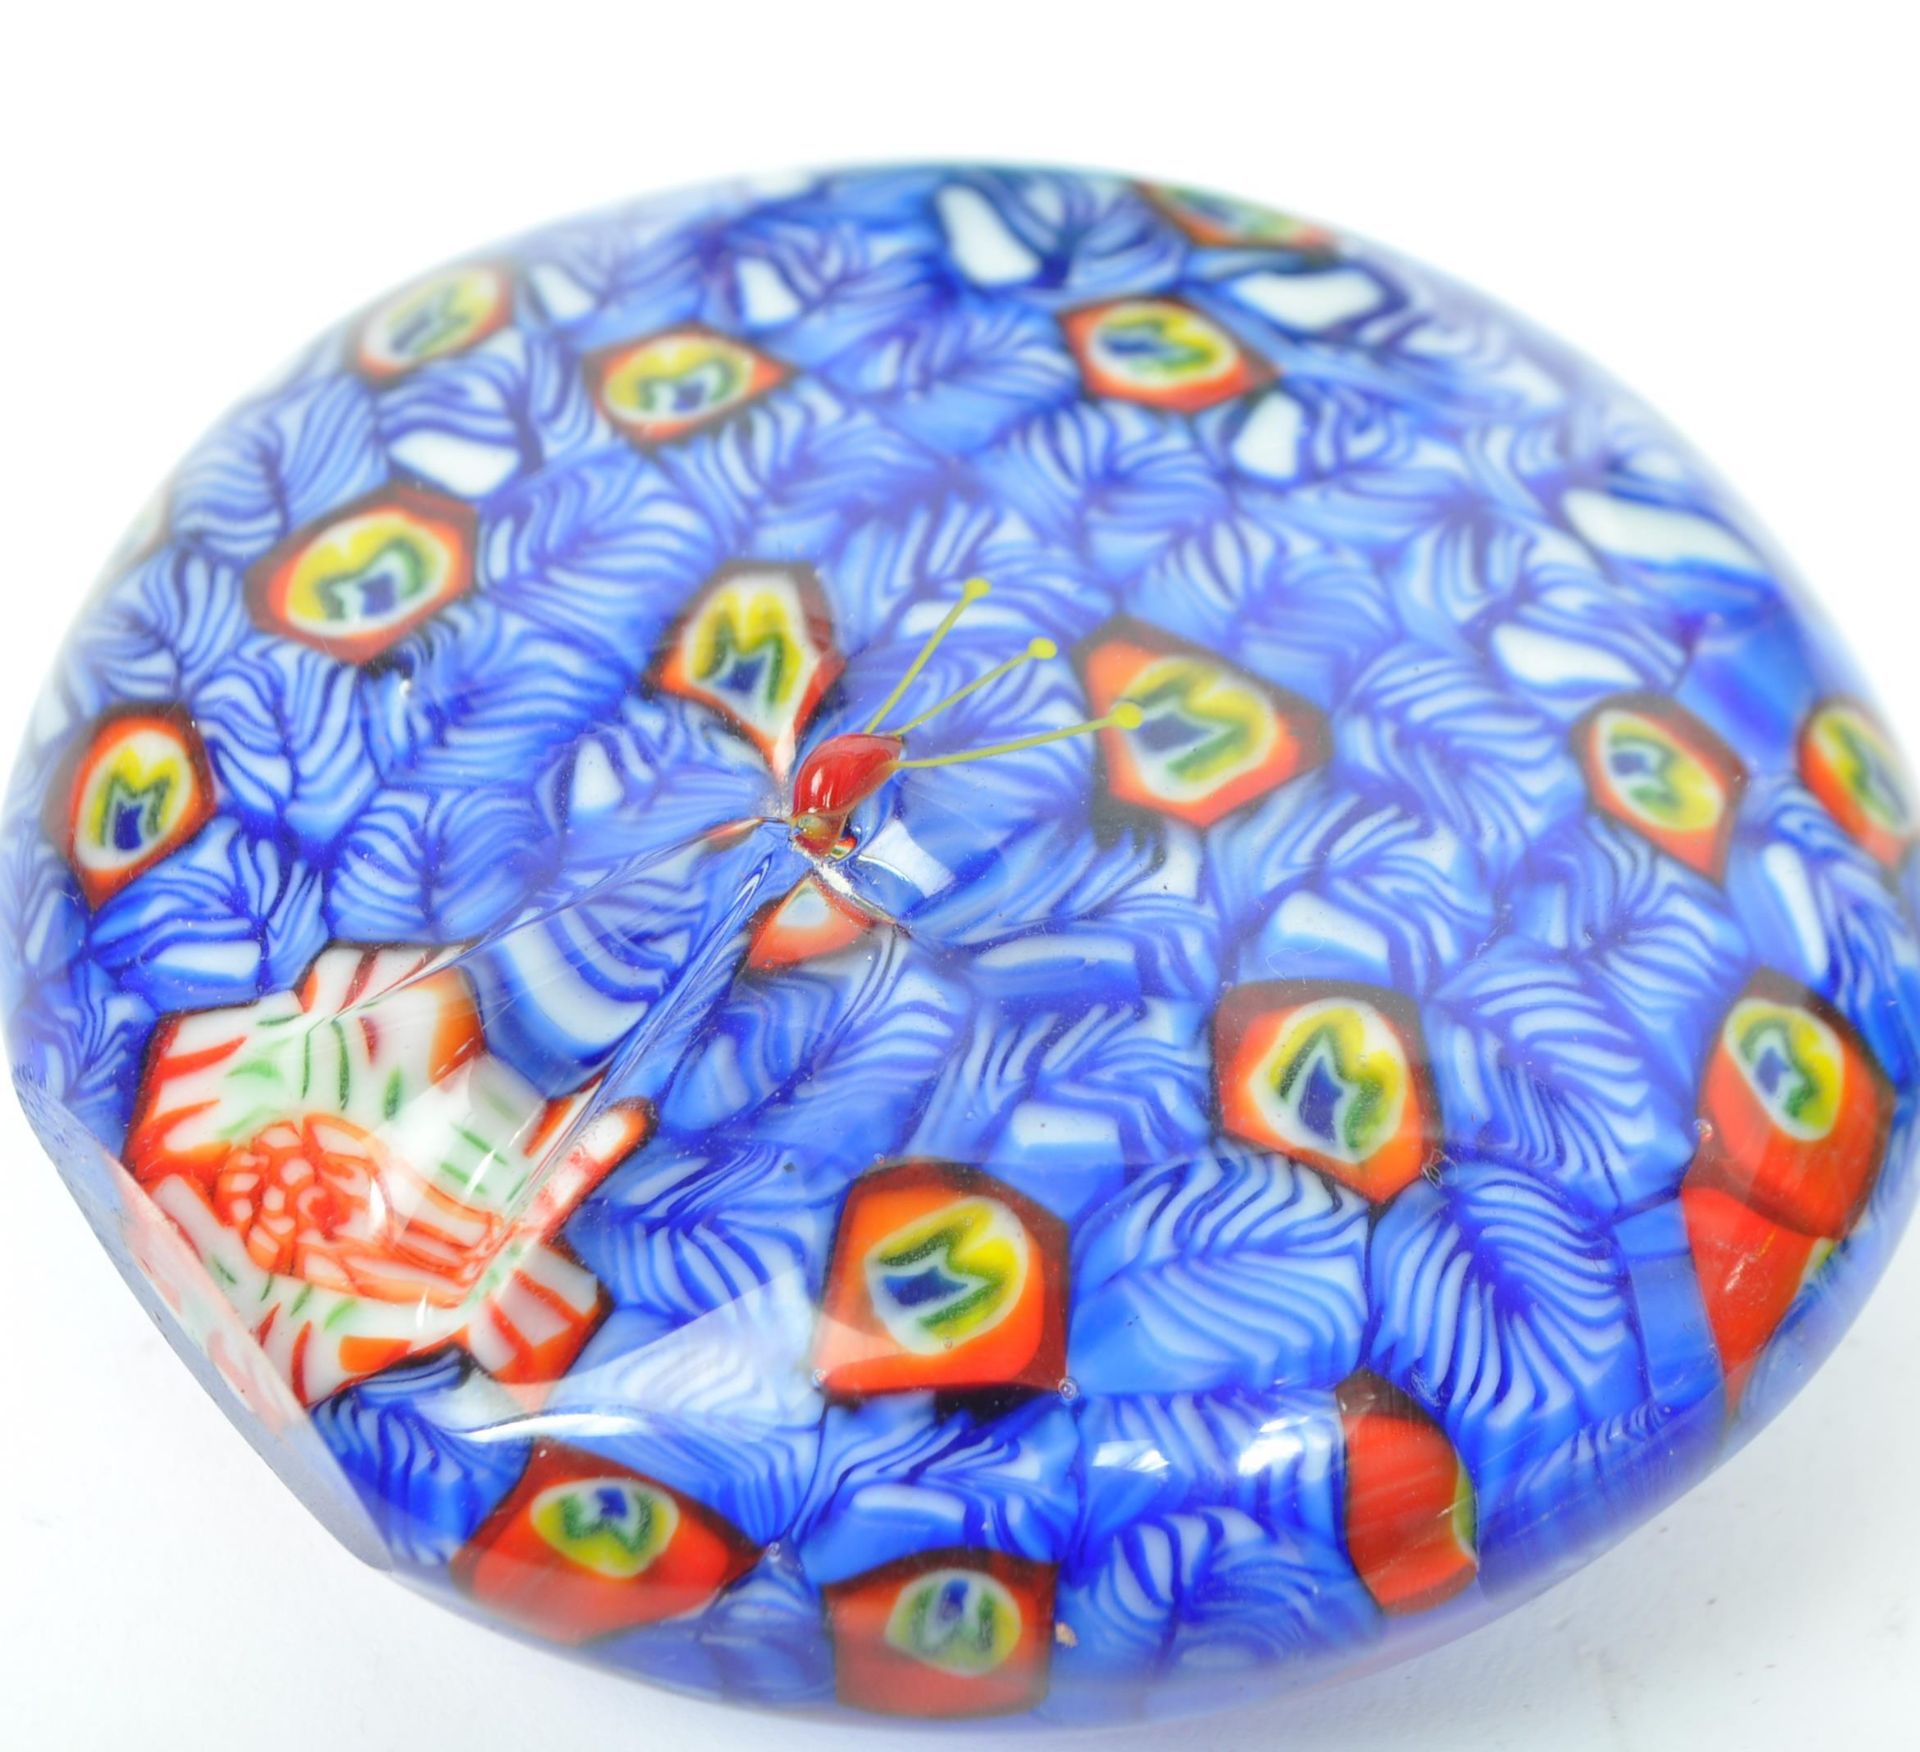 ASSORTMENT OF VINTAGE ART GLASS PAPERWEIGHTS - Image 5 of 5